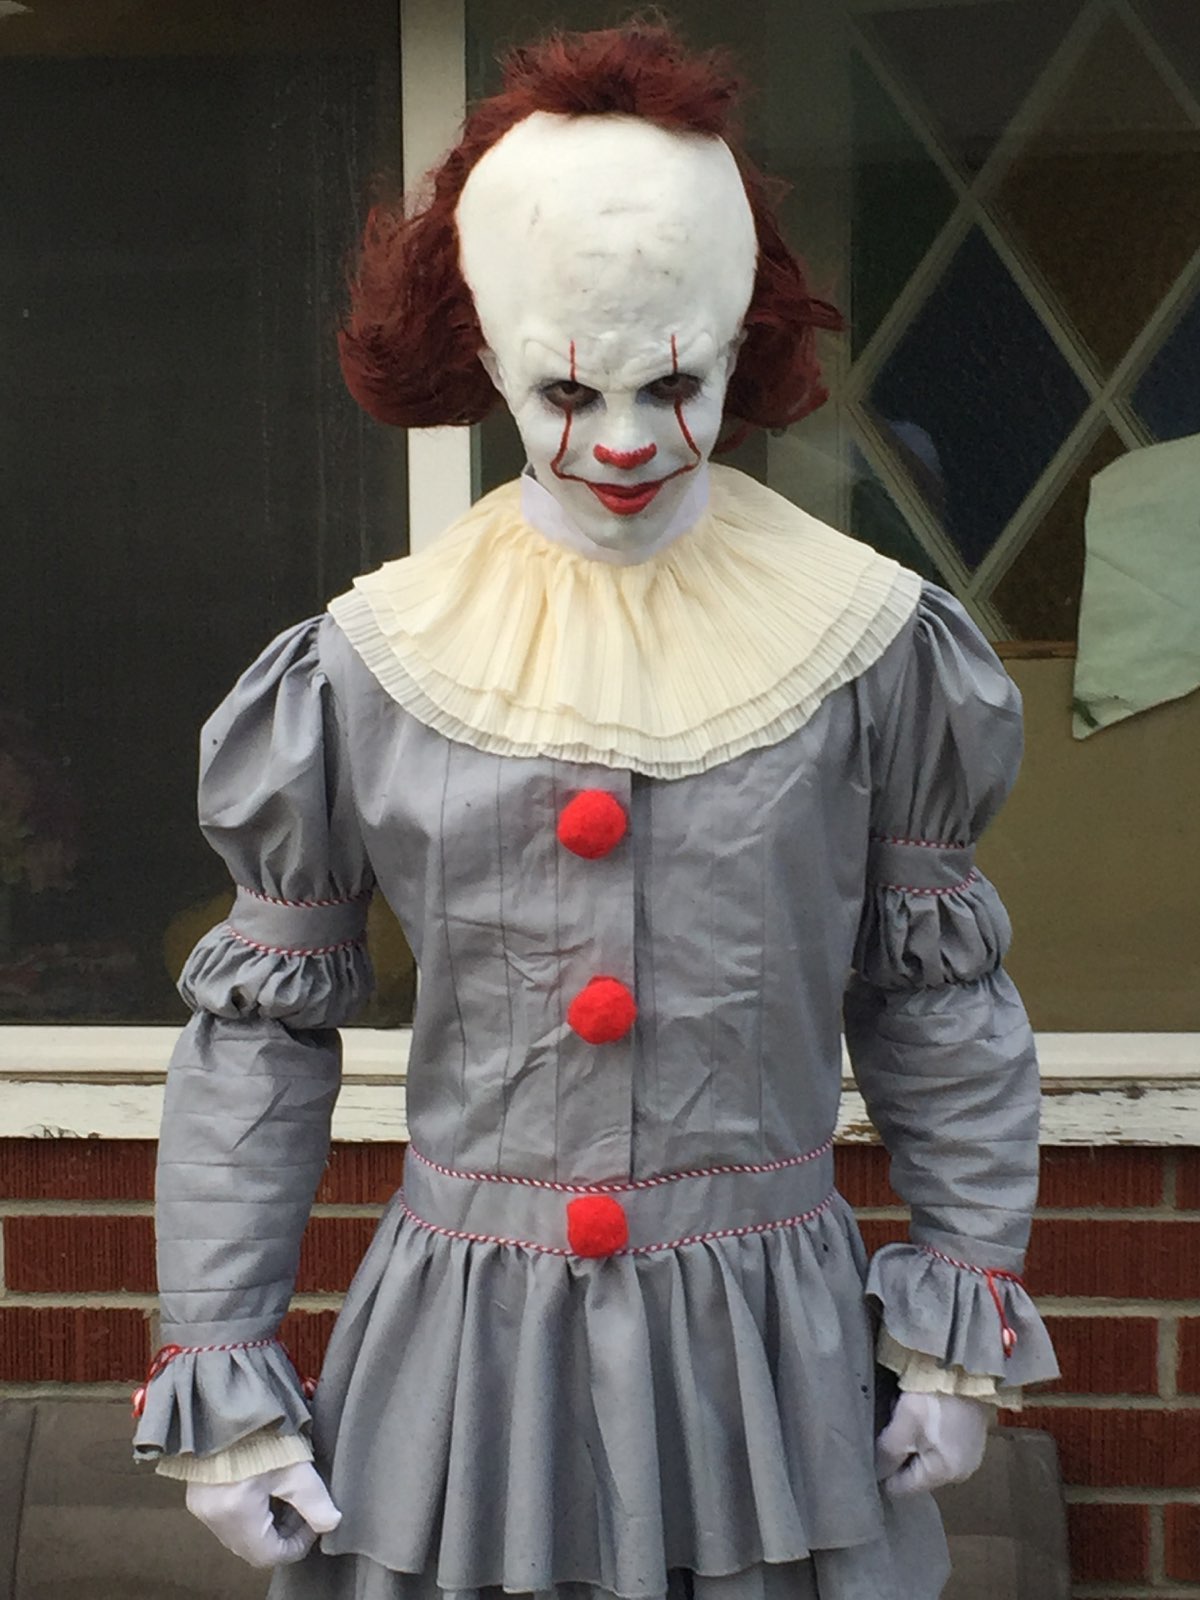 Pennywise - 2017 | RPF Costume and Prop Maker Community